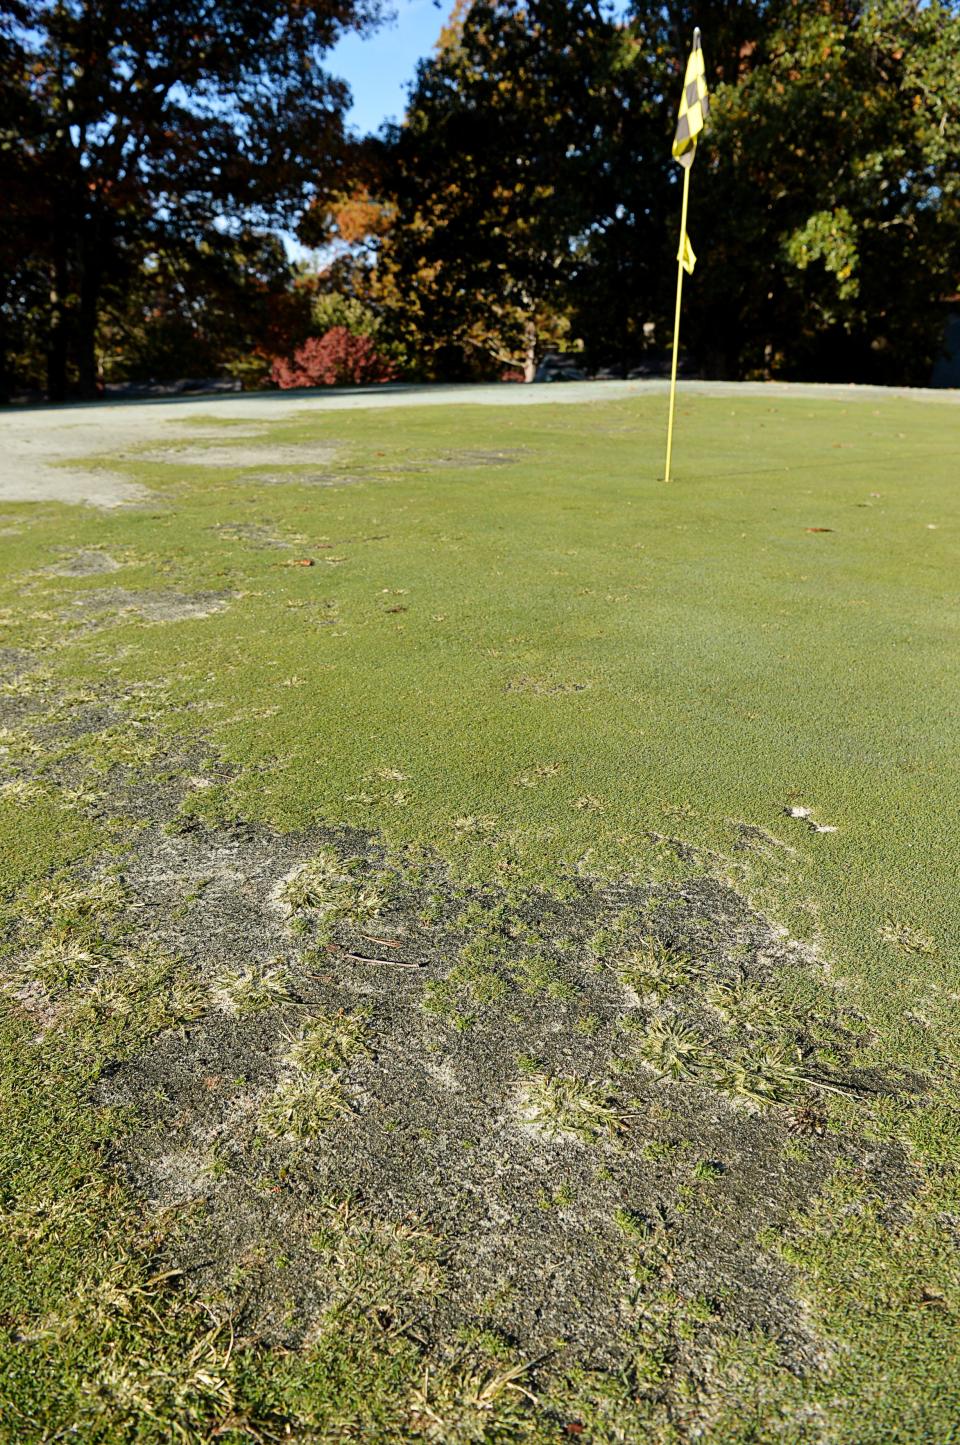 The 16th hole at the Asheville Municipal Golf Course was left in disrepair under former operator Pope Golf in 2022.